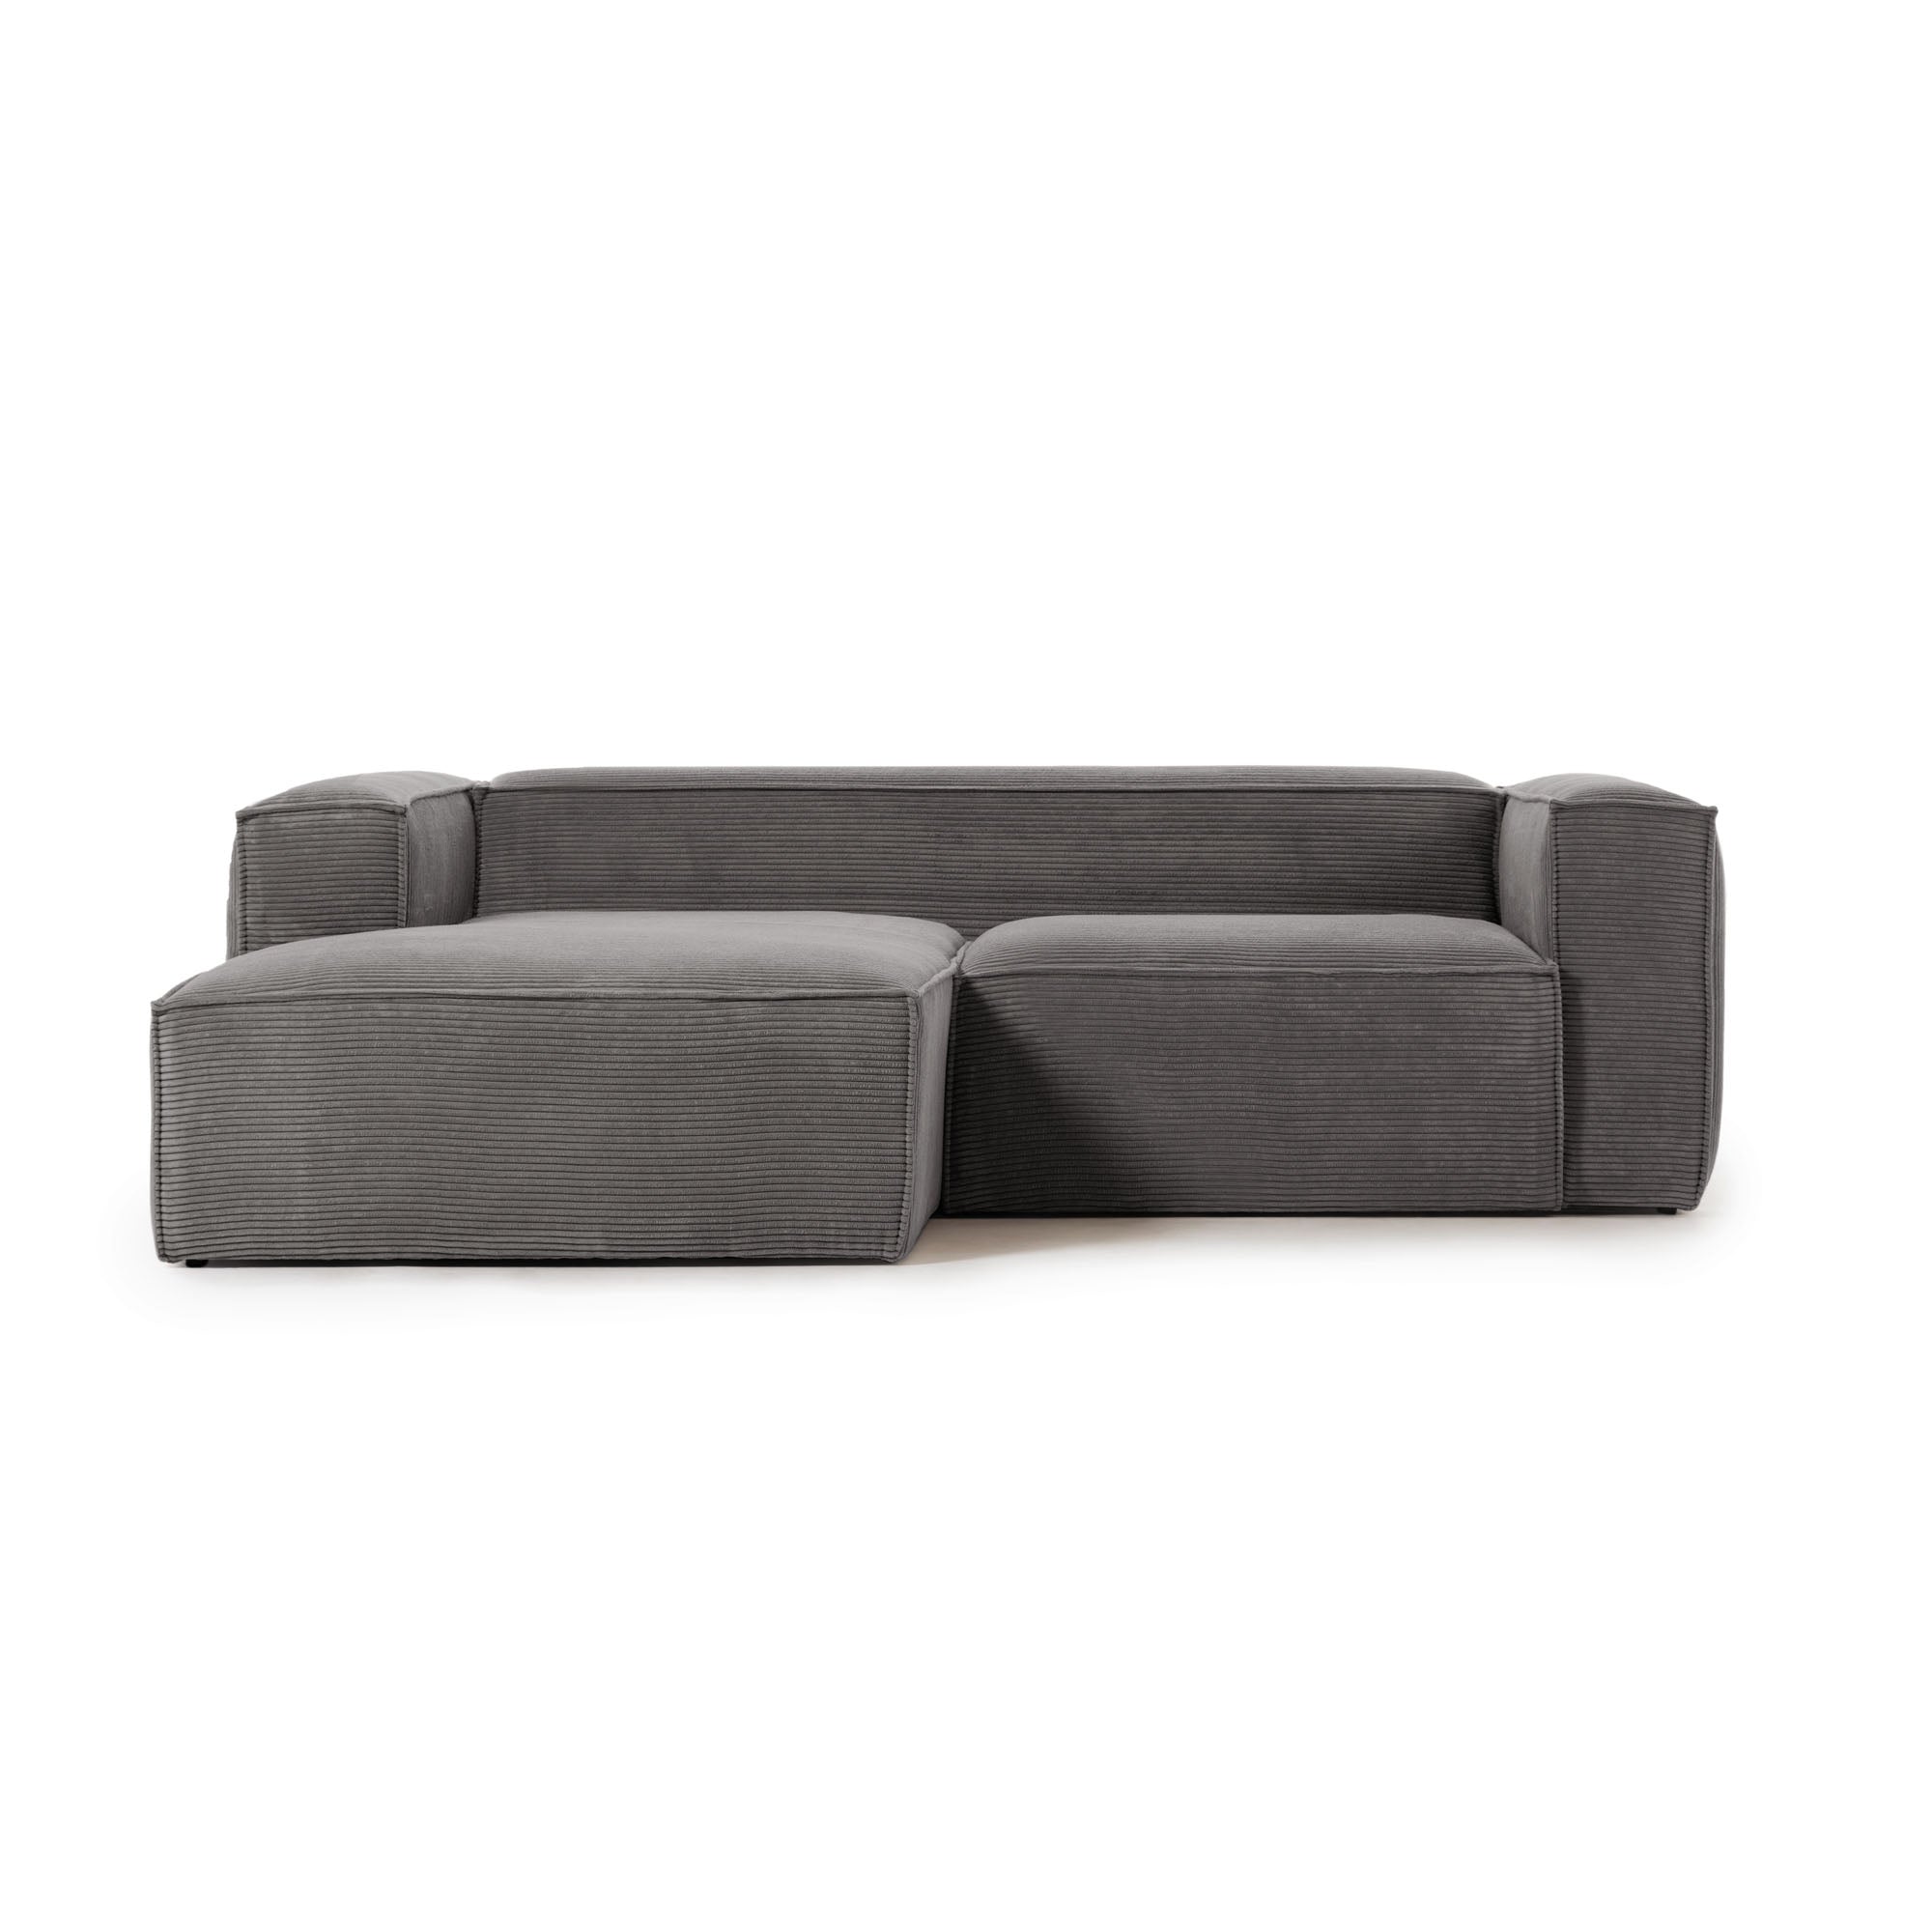 Blok 2 seater sofa with left side chaise longue in grey wide seam corduroy, 240 cm